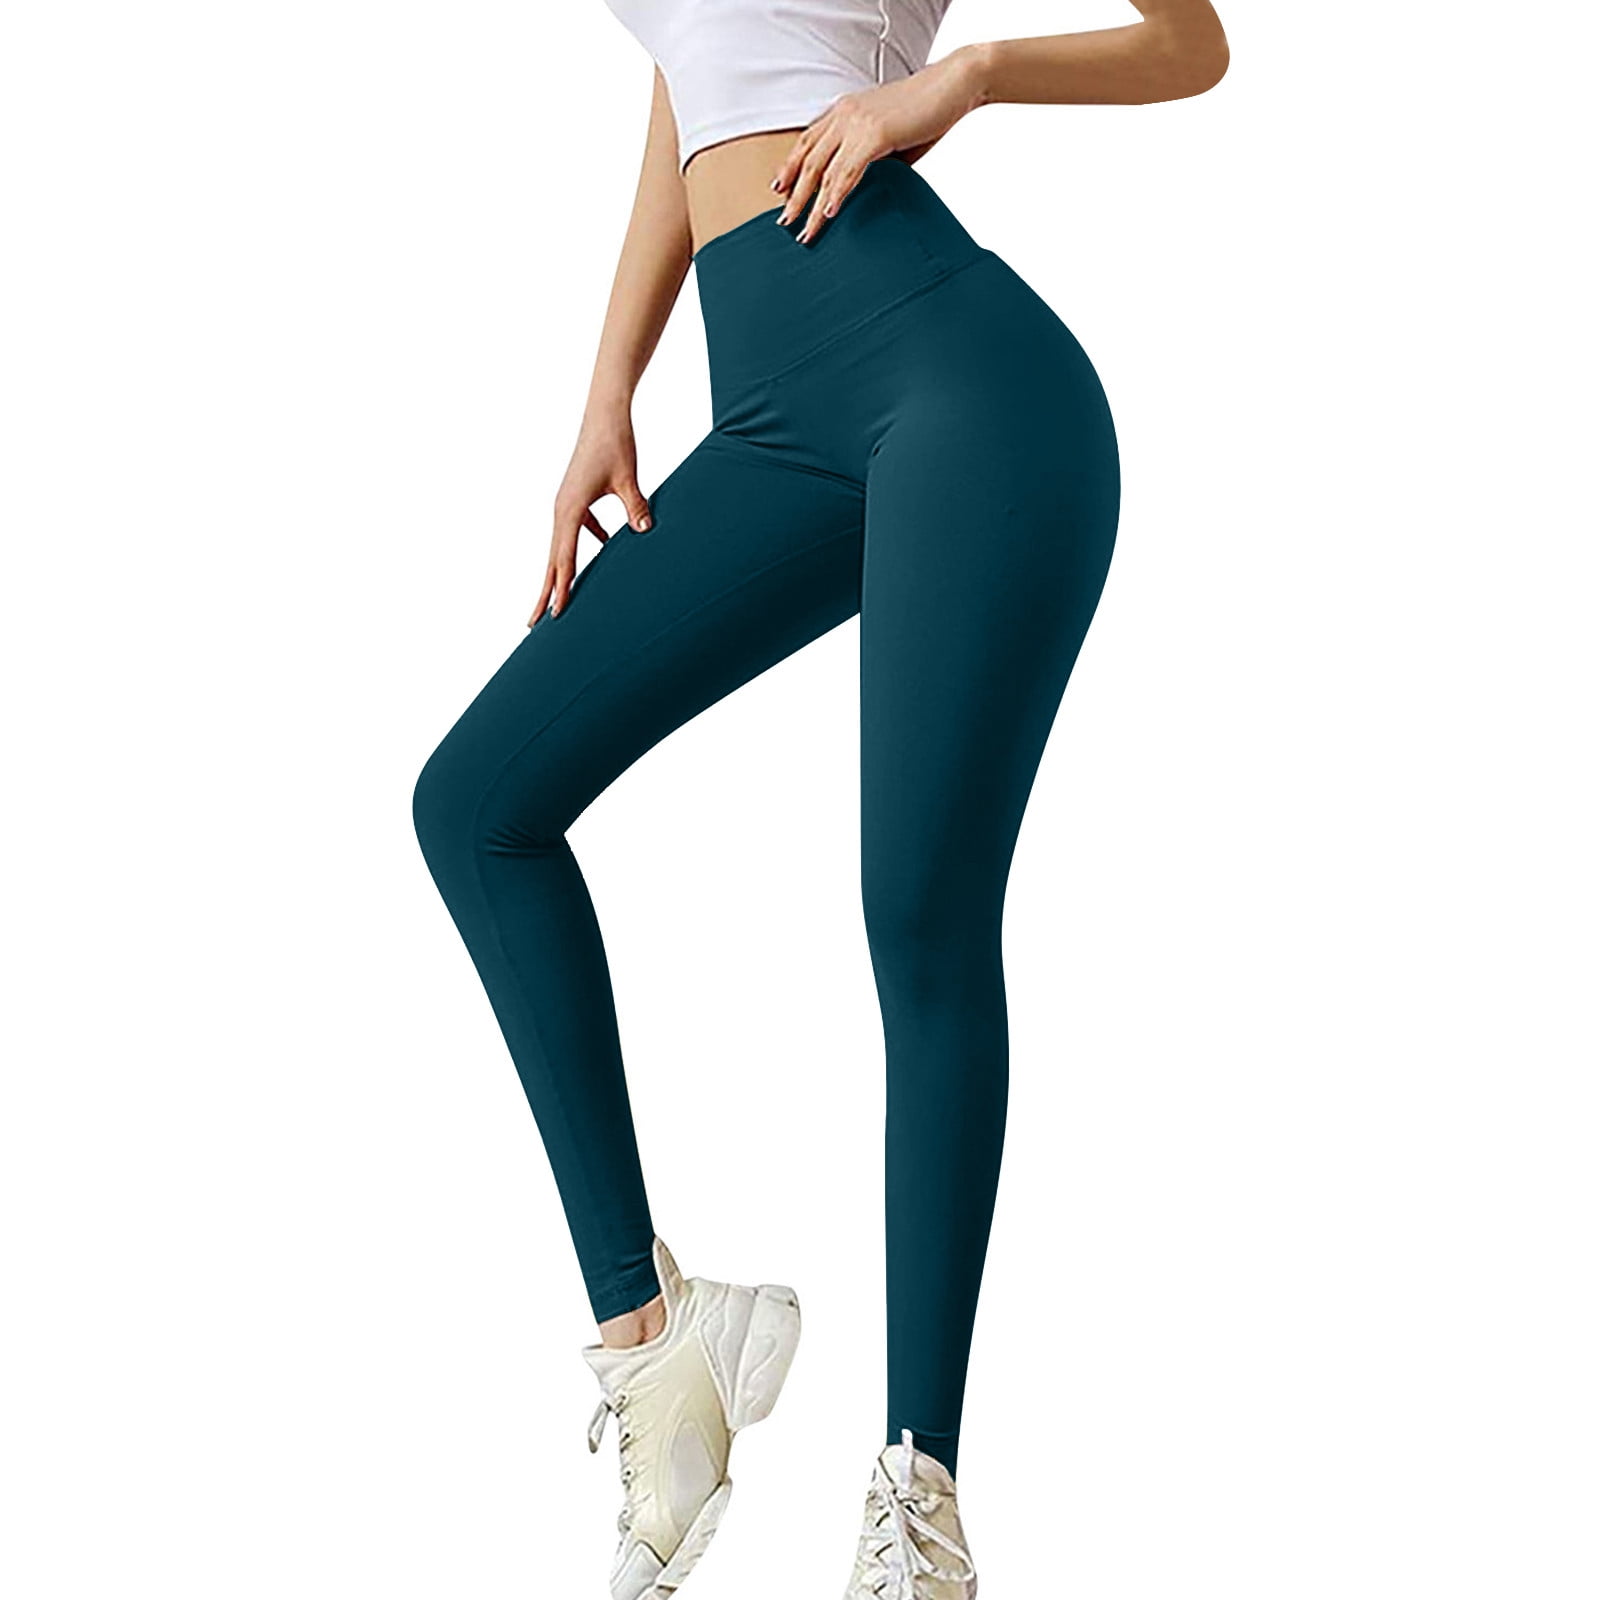 Kayannuo Yoga Pants Women Back to School Clearance Women's High Waist  Bodybuilding Sports Fashion Tight Fitting Yoga Trousers Full Length Pants  Green